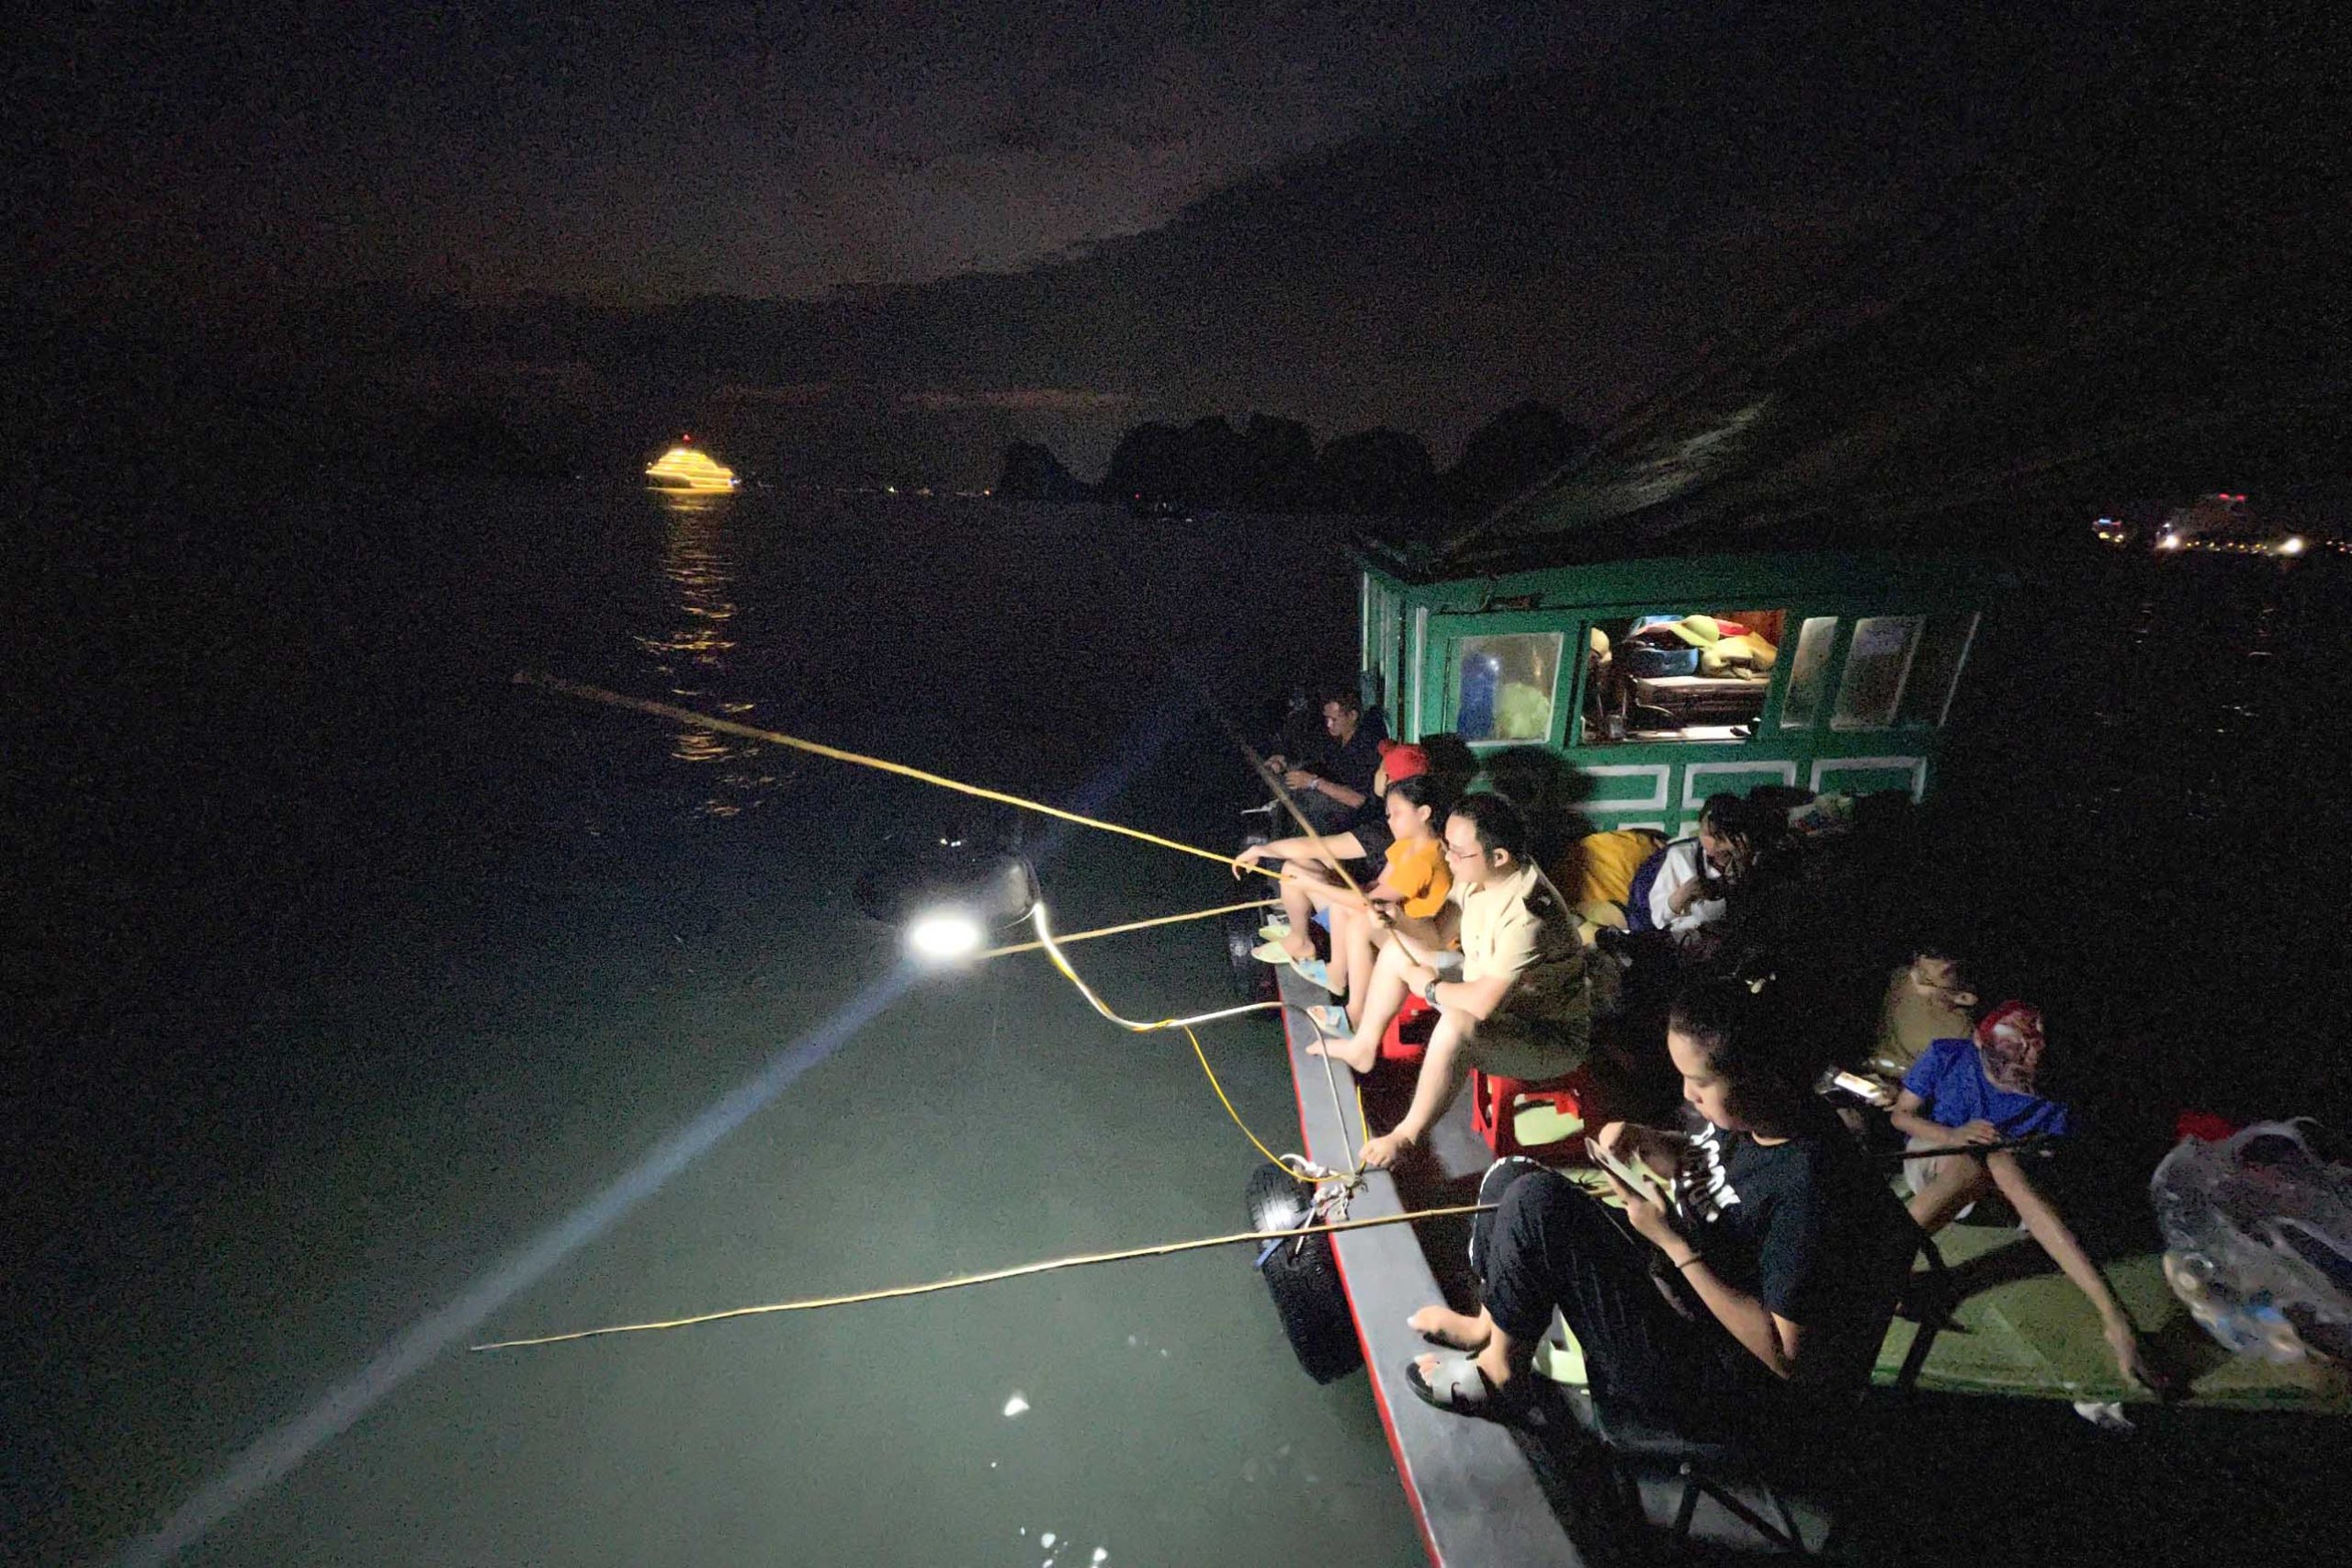 Try squid fishing at night.